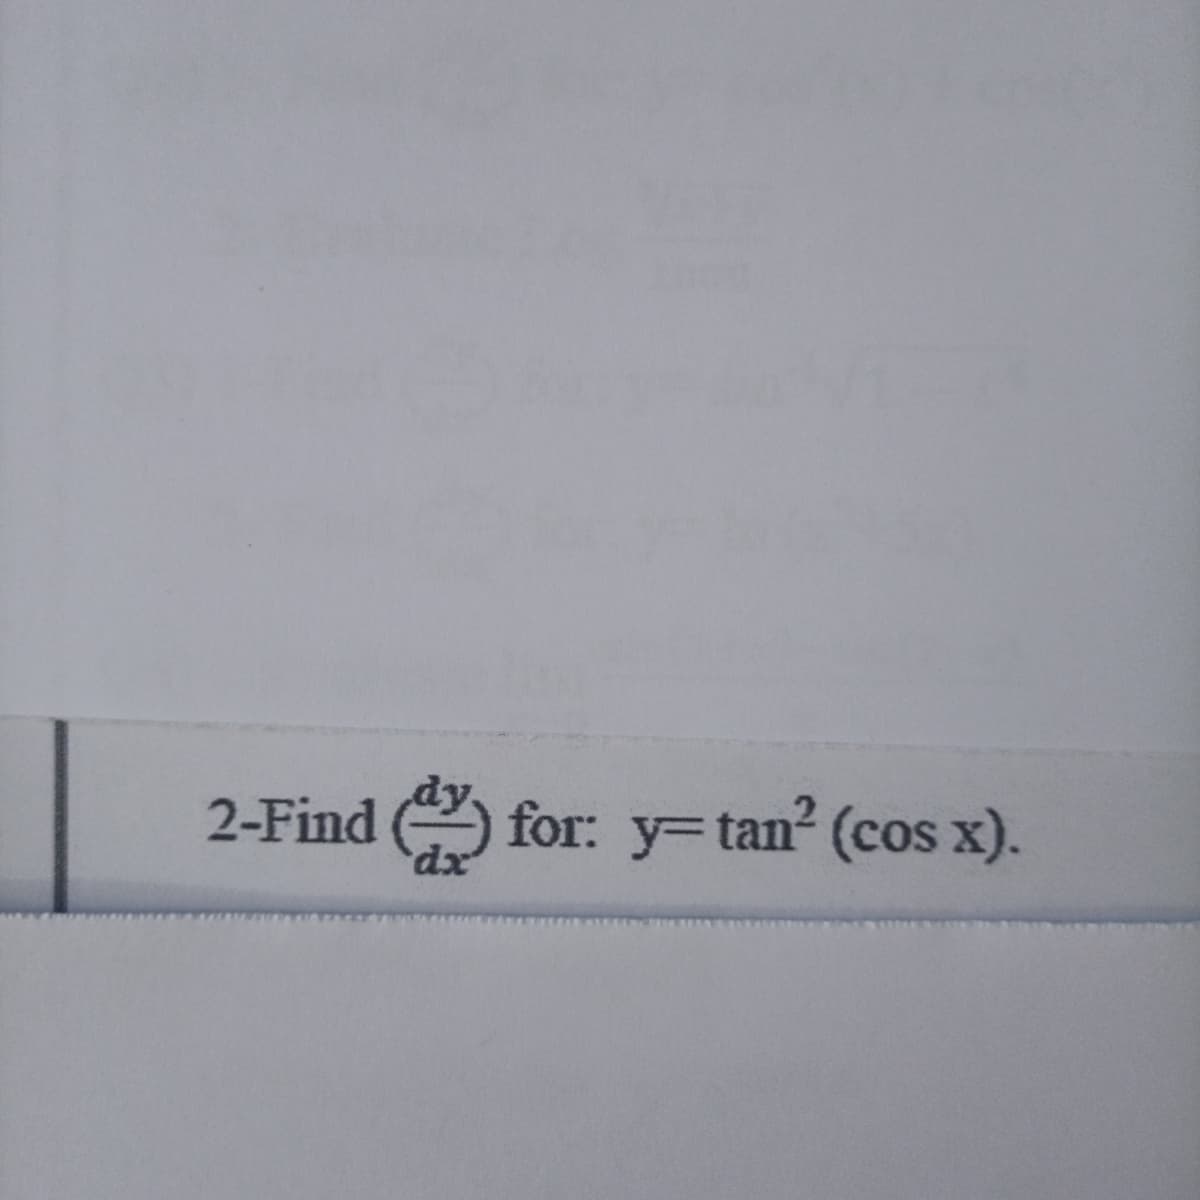 2-Find O for: y=tan? (cos x).
